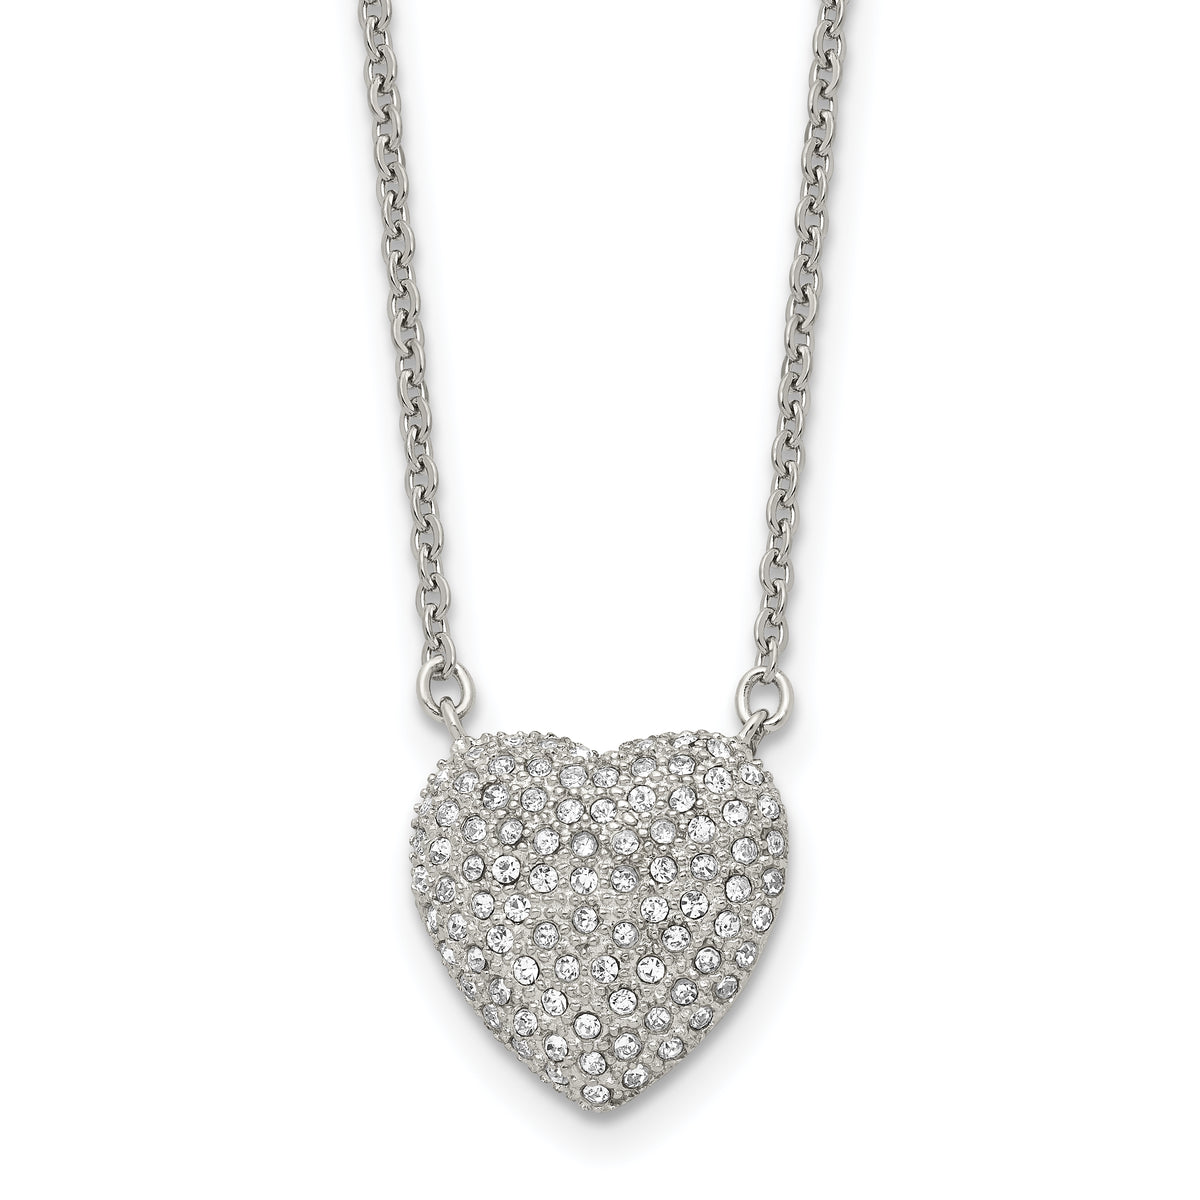 Chisel Stainless Steel Polished with Preciosa Crystal Heart on a 16 inch Cable Chain with a 2 inch Extension Necklace